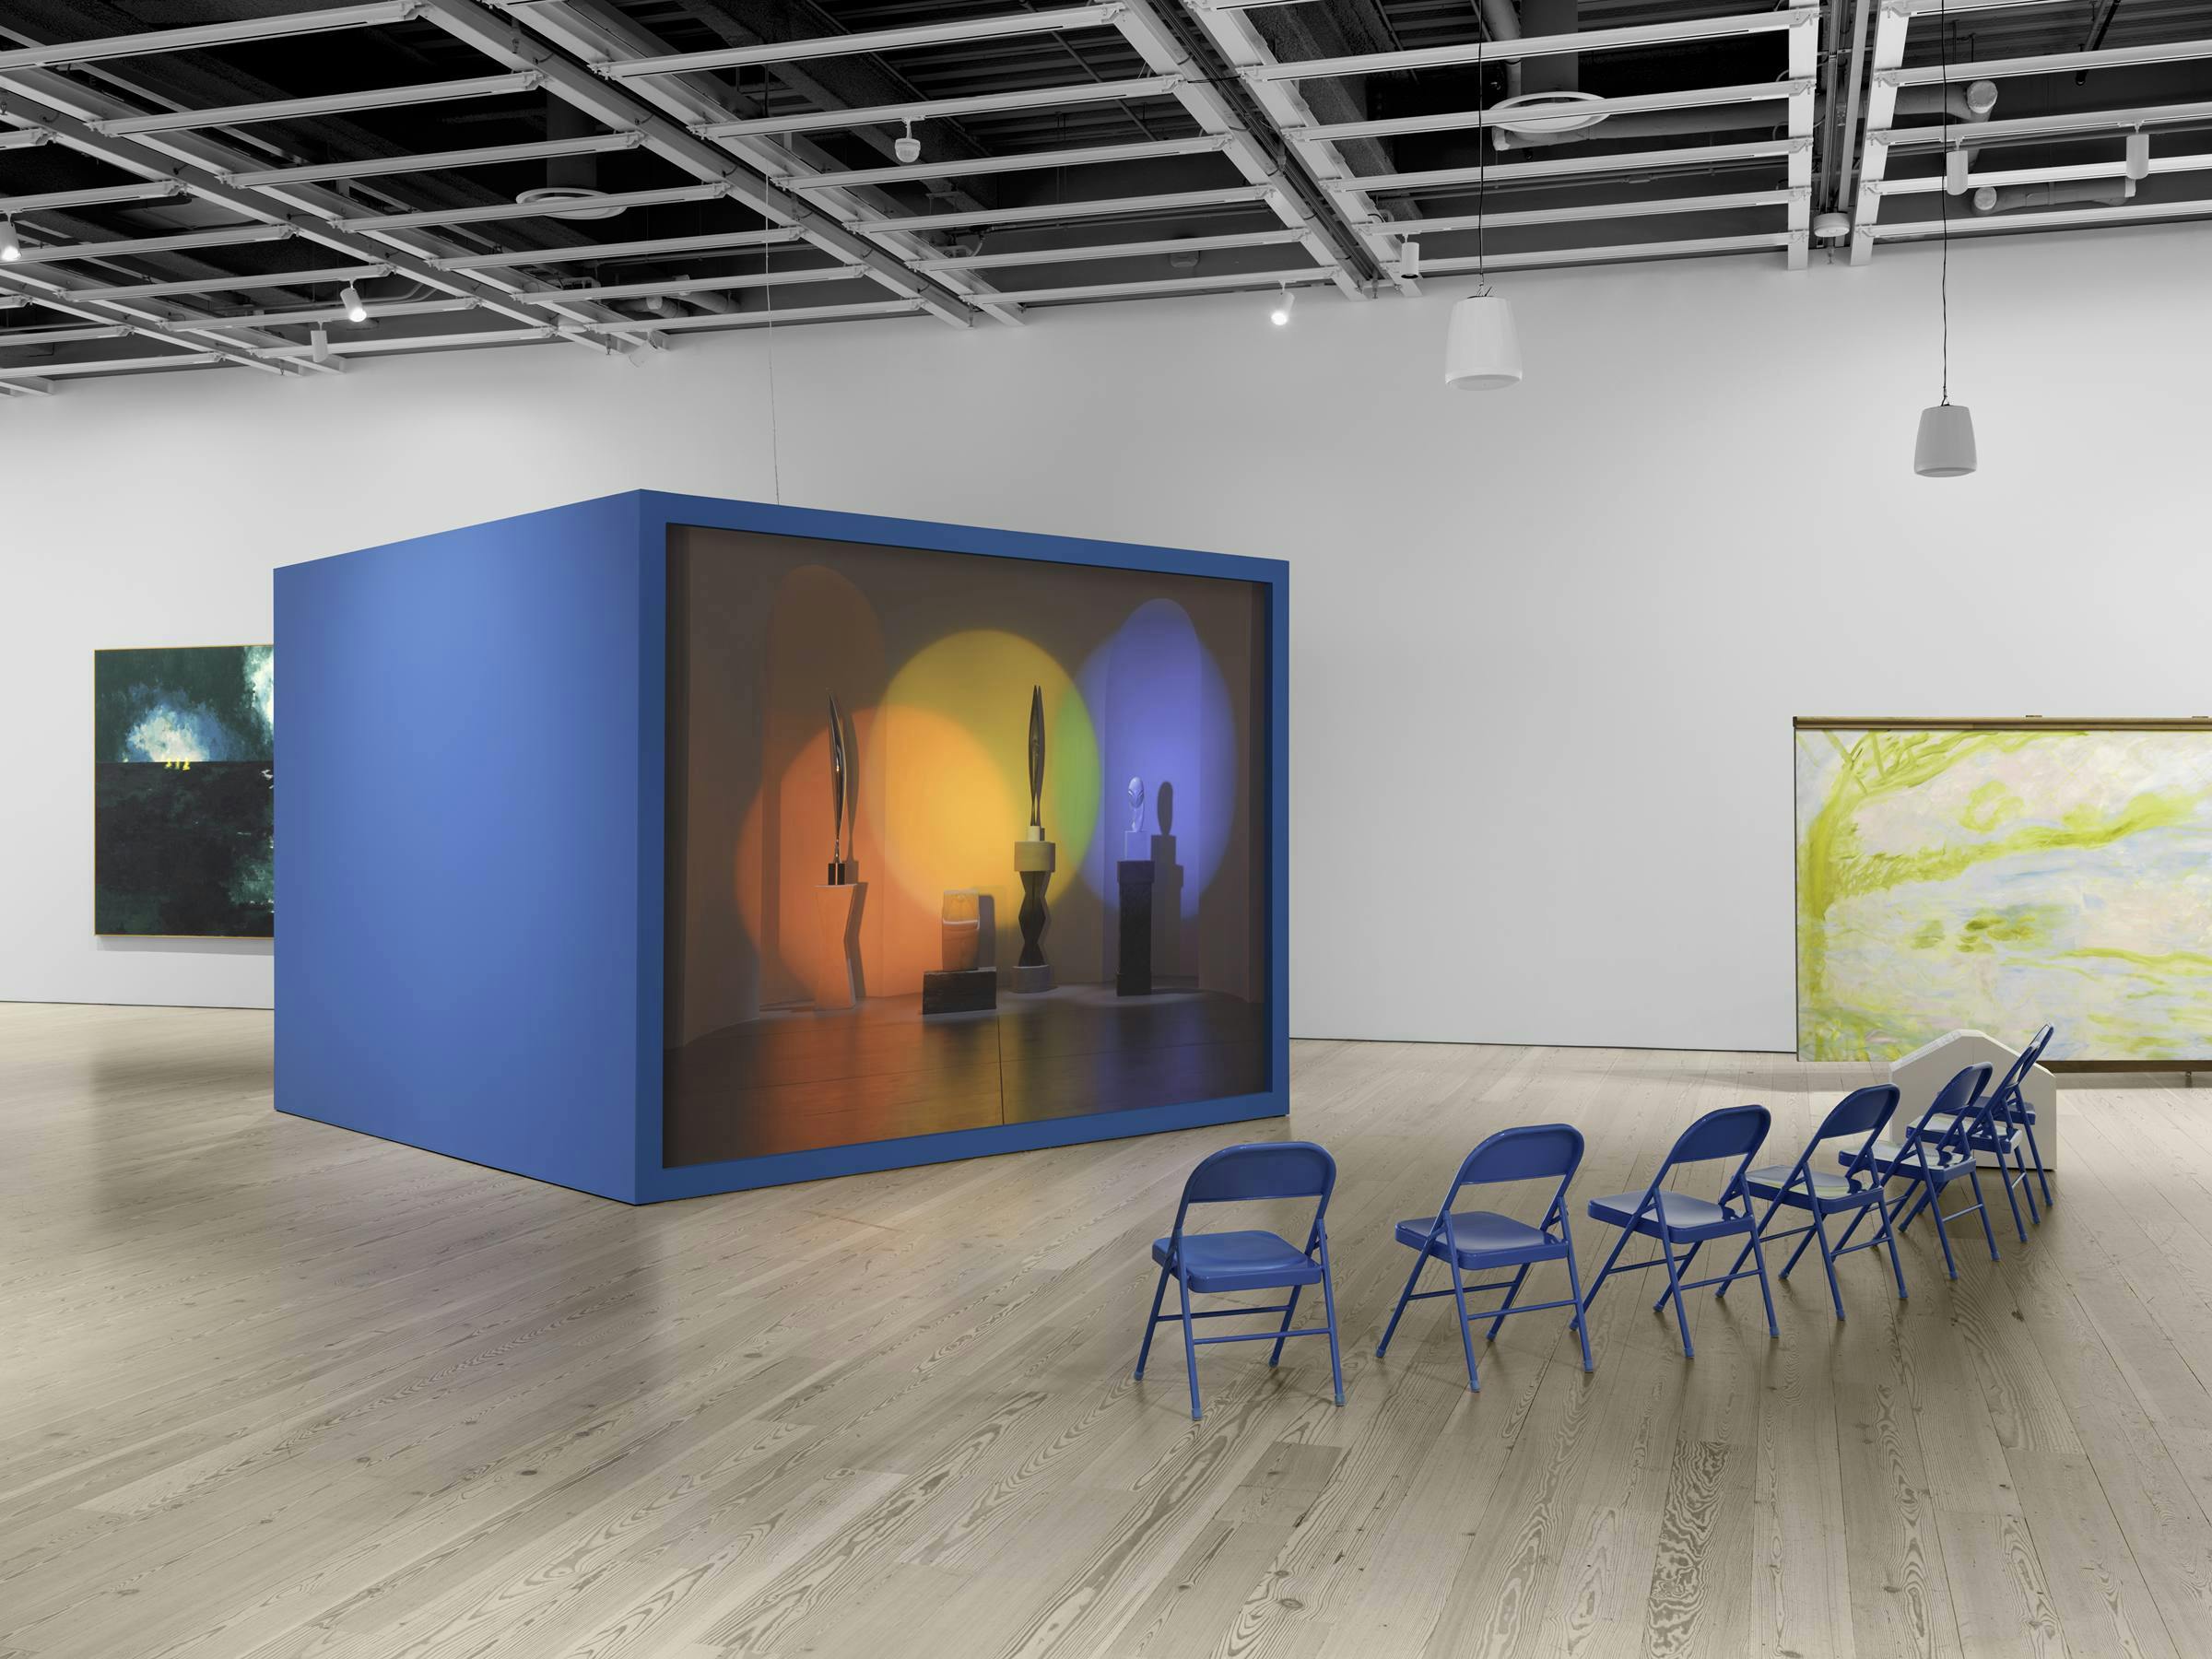 an art gallery with wooden floors and white walls. A video art work projected on to a blue freestanding box. 8 blue chairs are in front of the projection for the audience to sit on. 